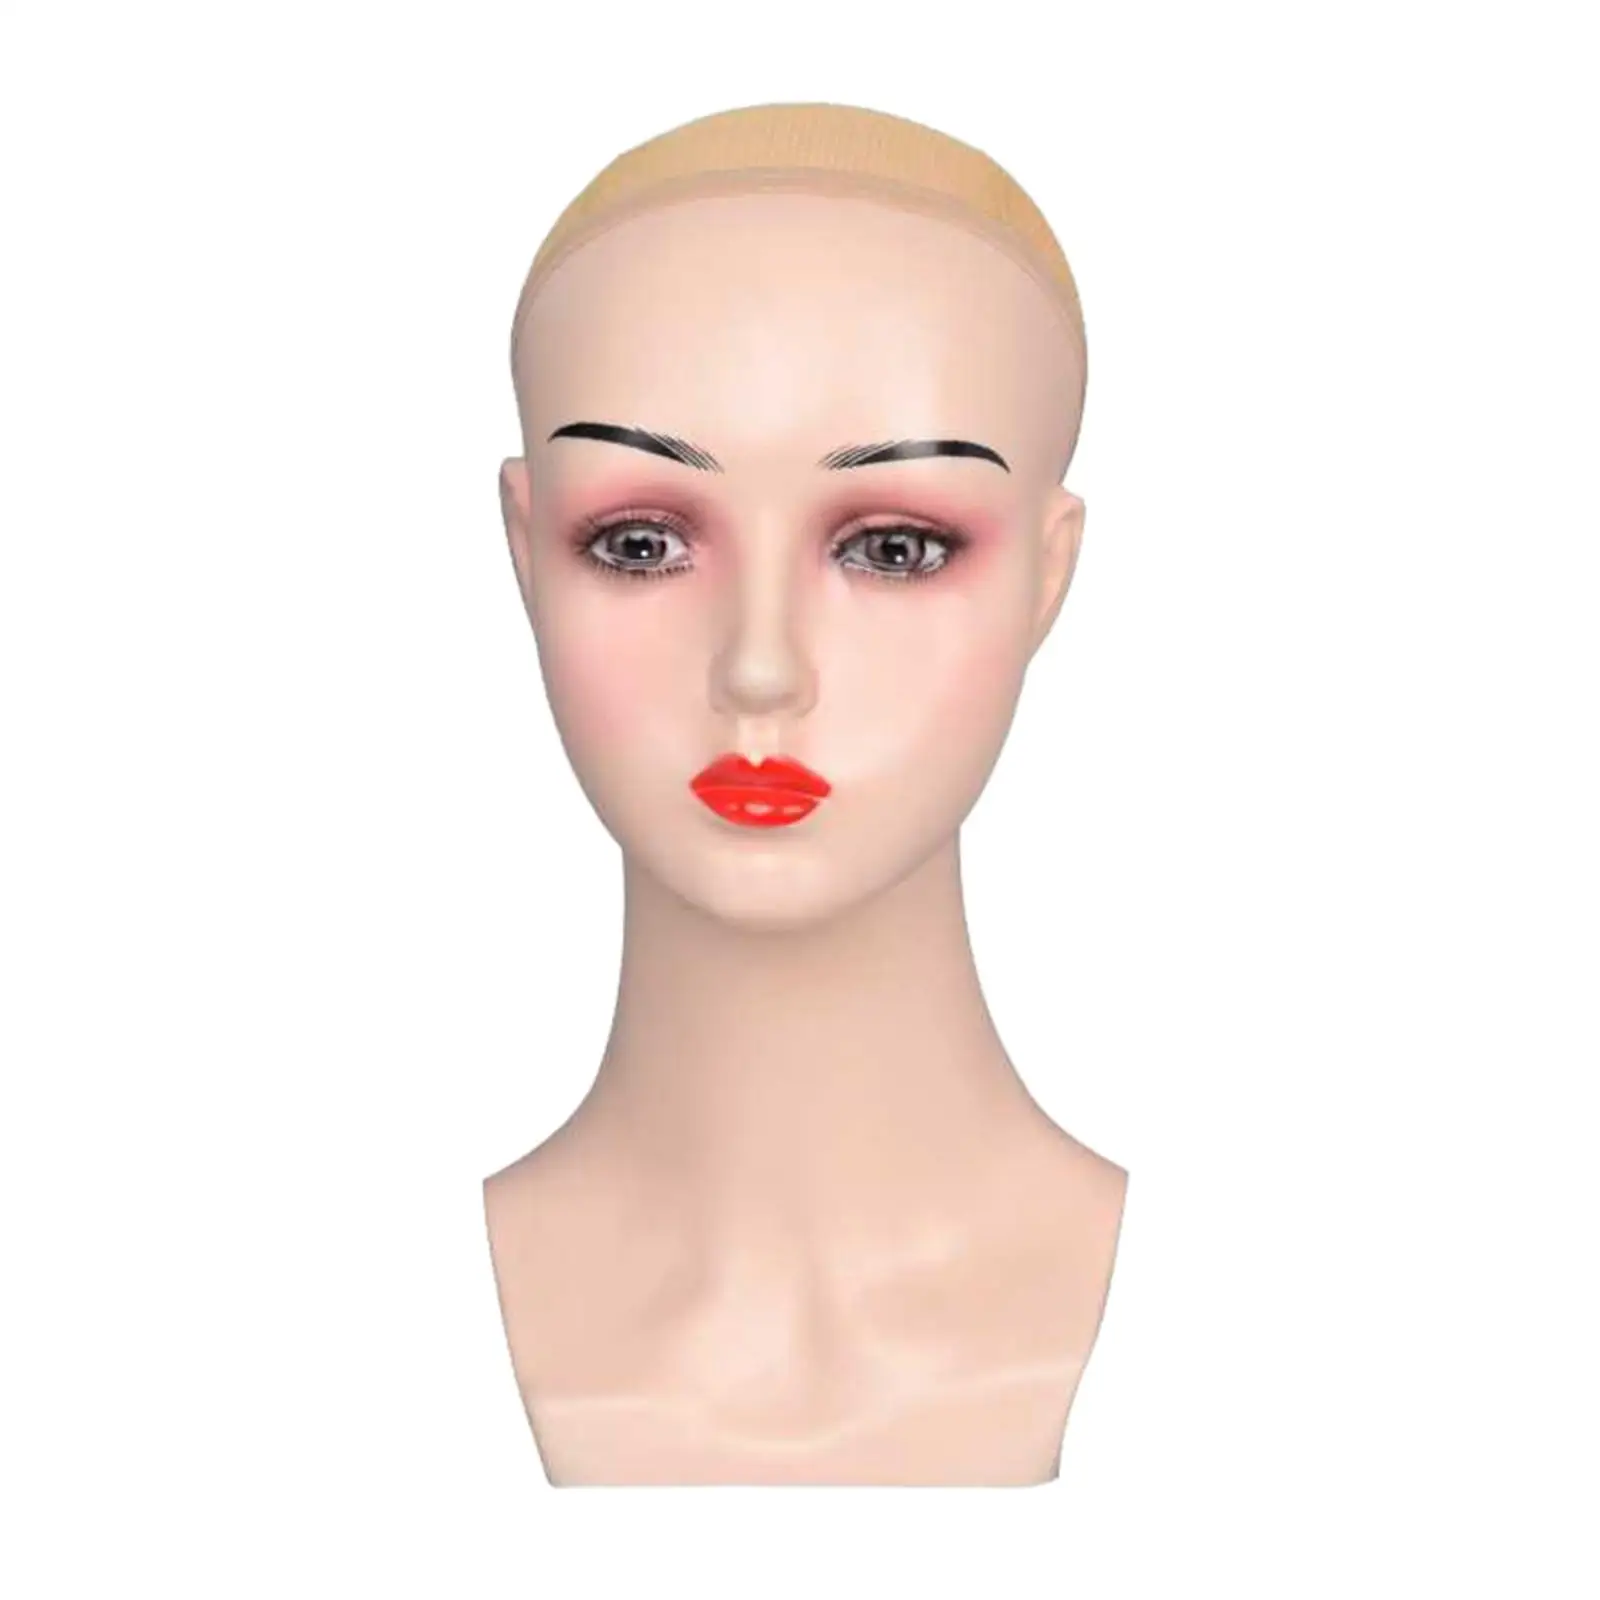 Female Wig Head Mannequin Realistic with Makeup Hat Display Rack Manikin for Wigs Making Styling Glasses Hats